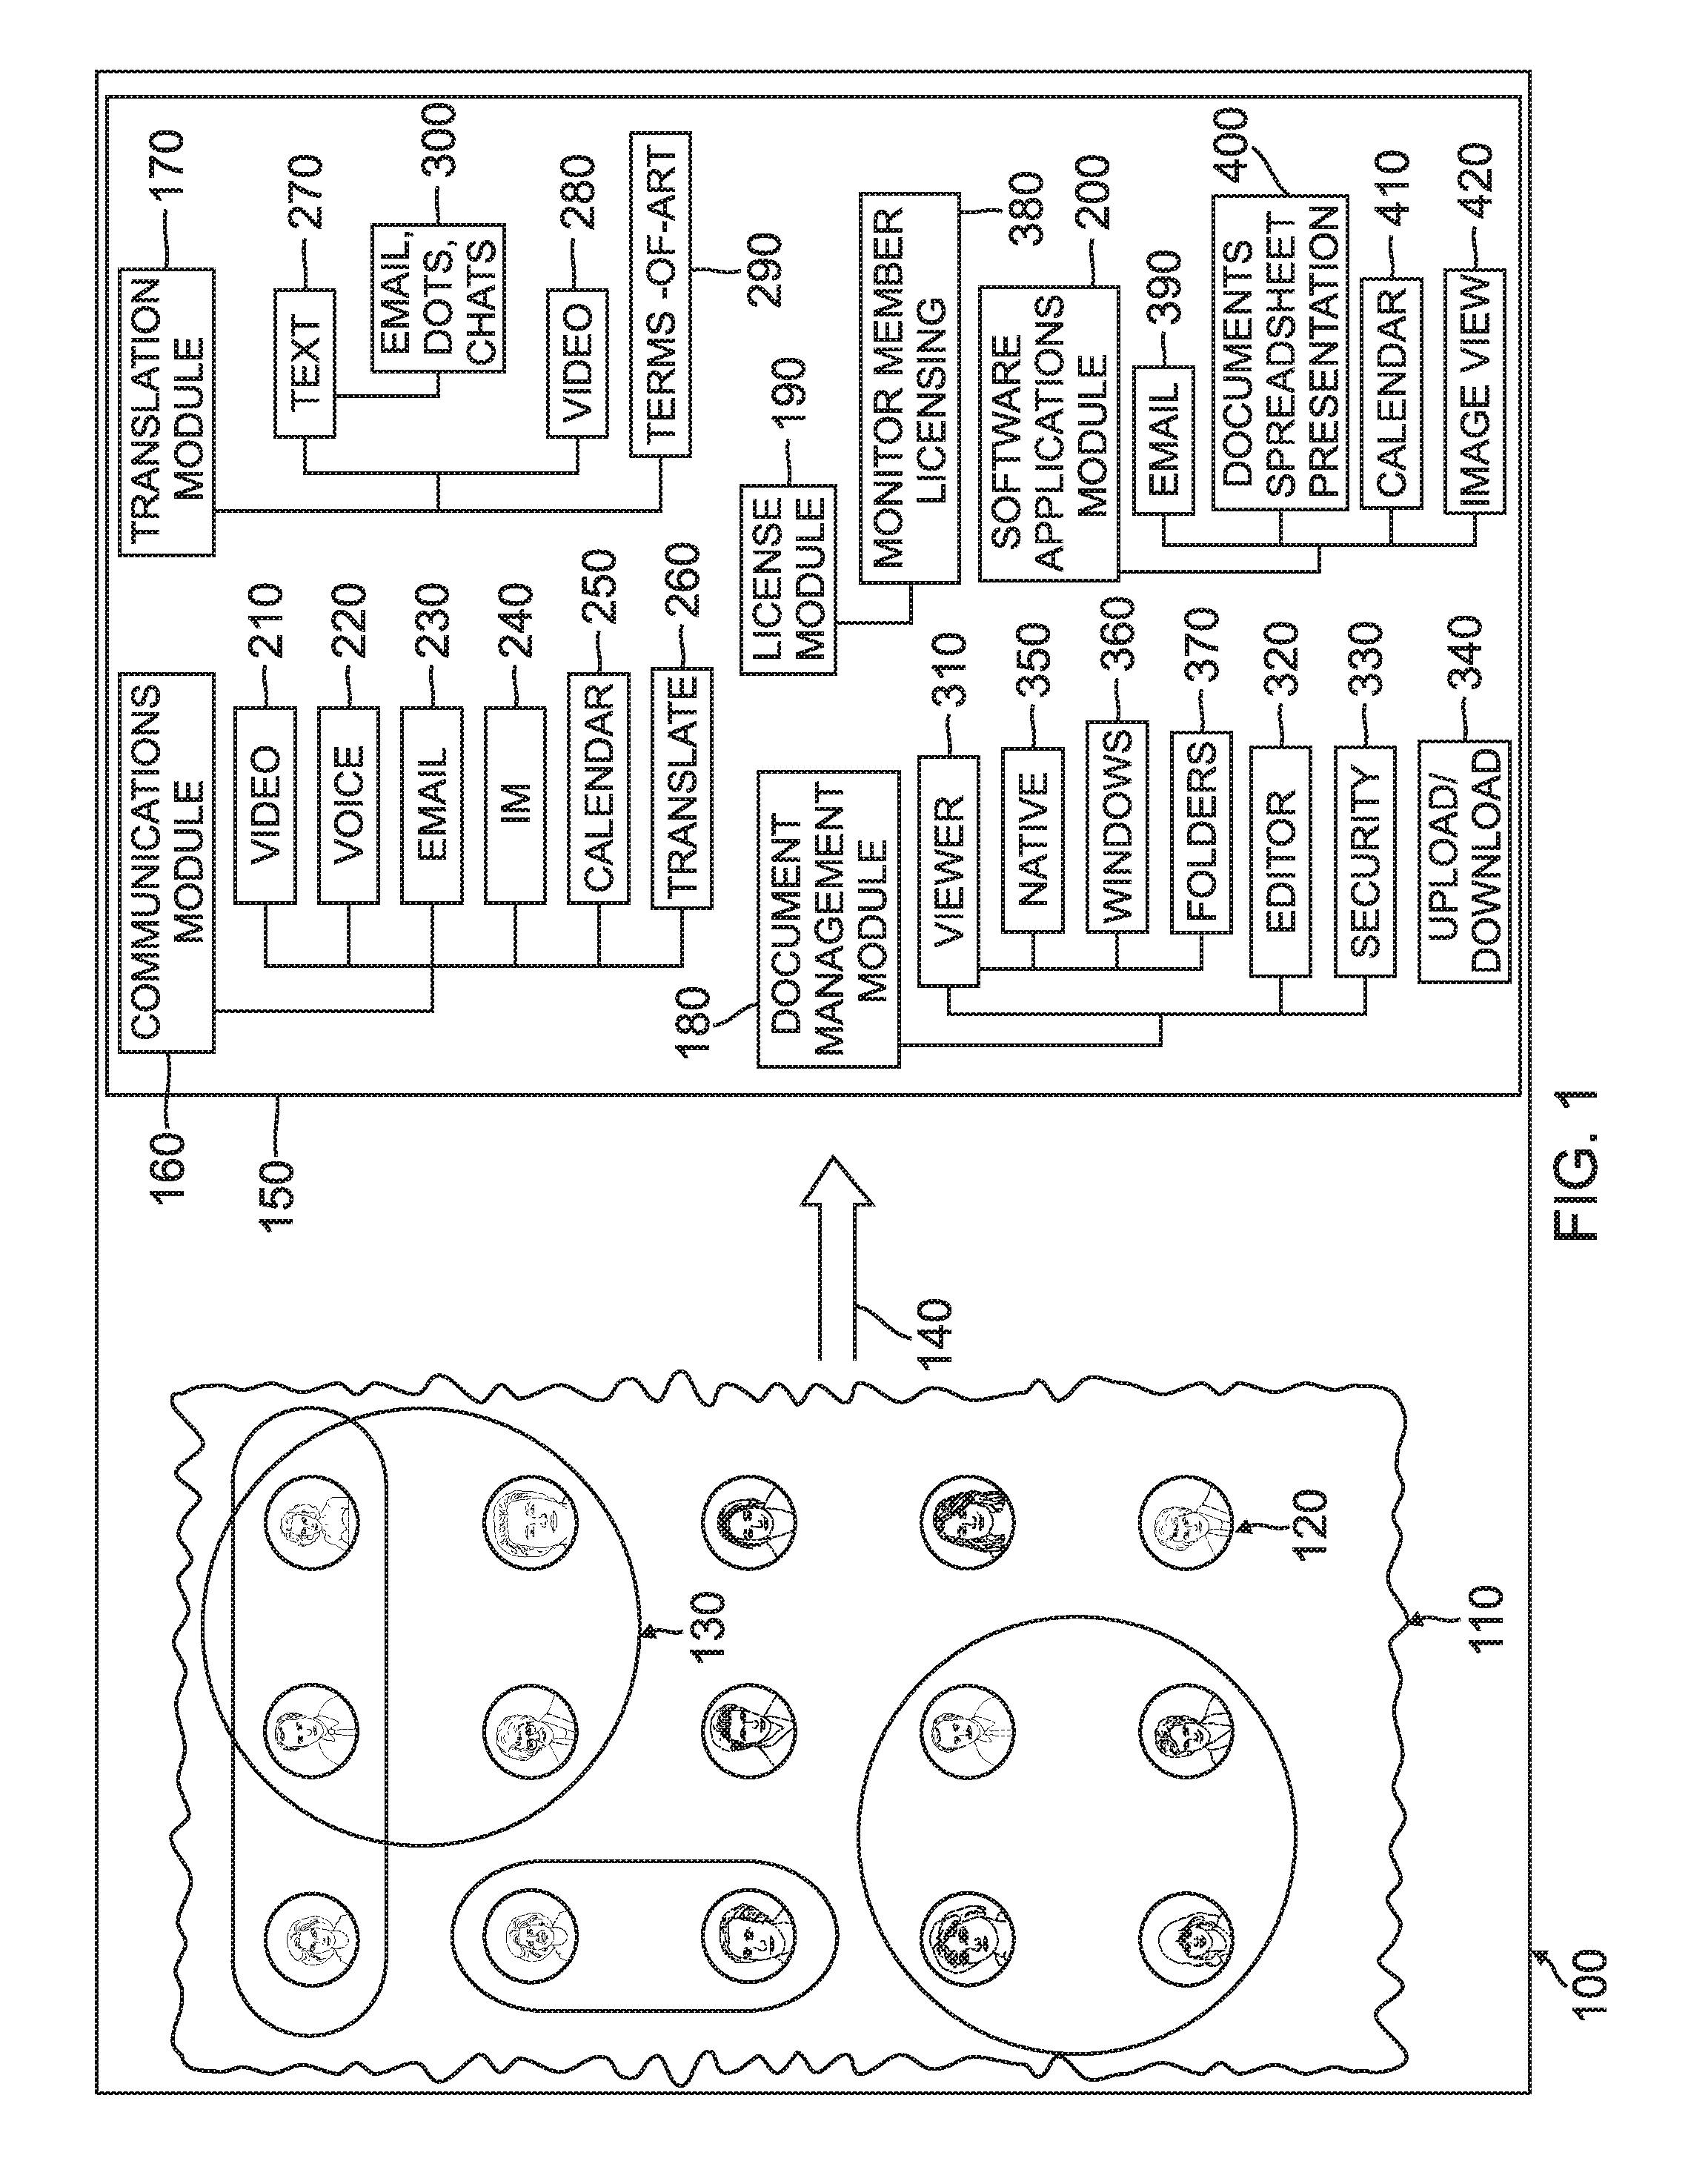 Method for associating a code with an electronic document, a hard document and storage information relating to the hard document